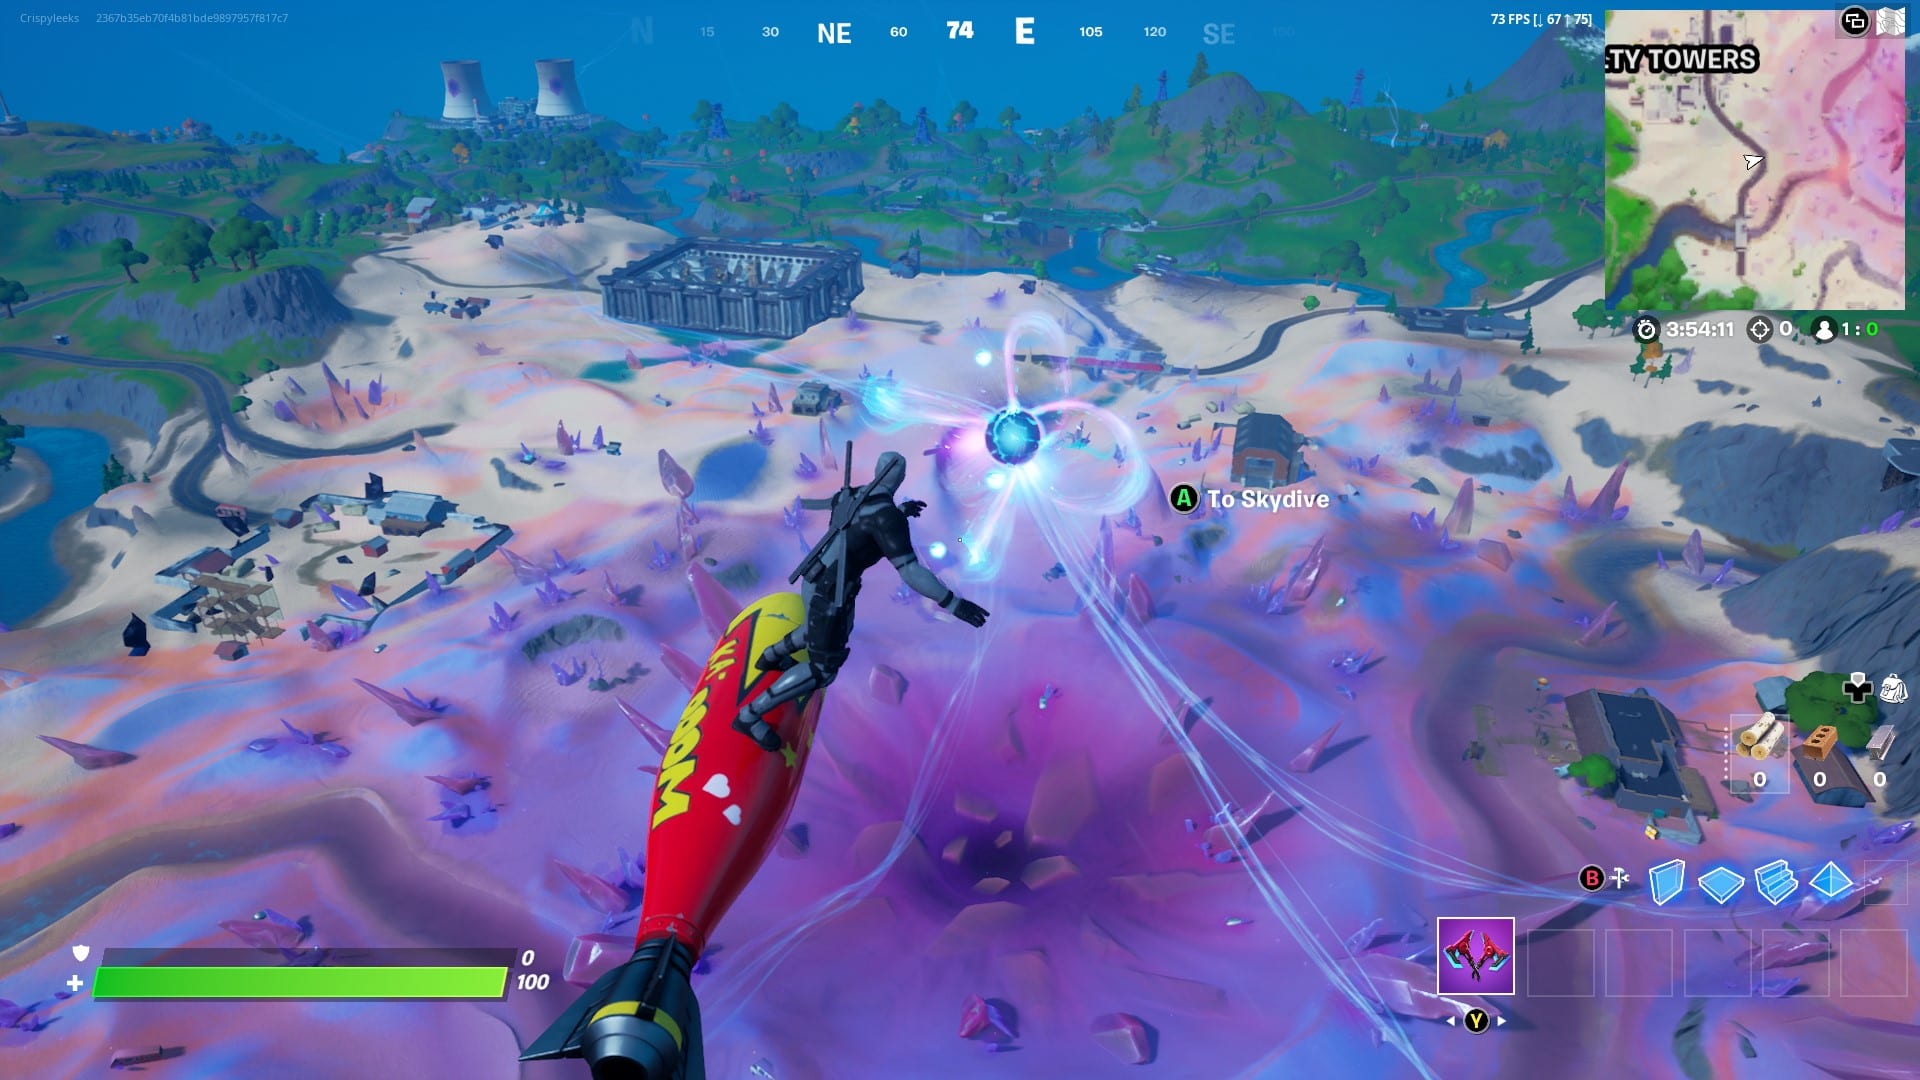 Fortnite player discovers the Zero Point in real life on Google Maps